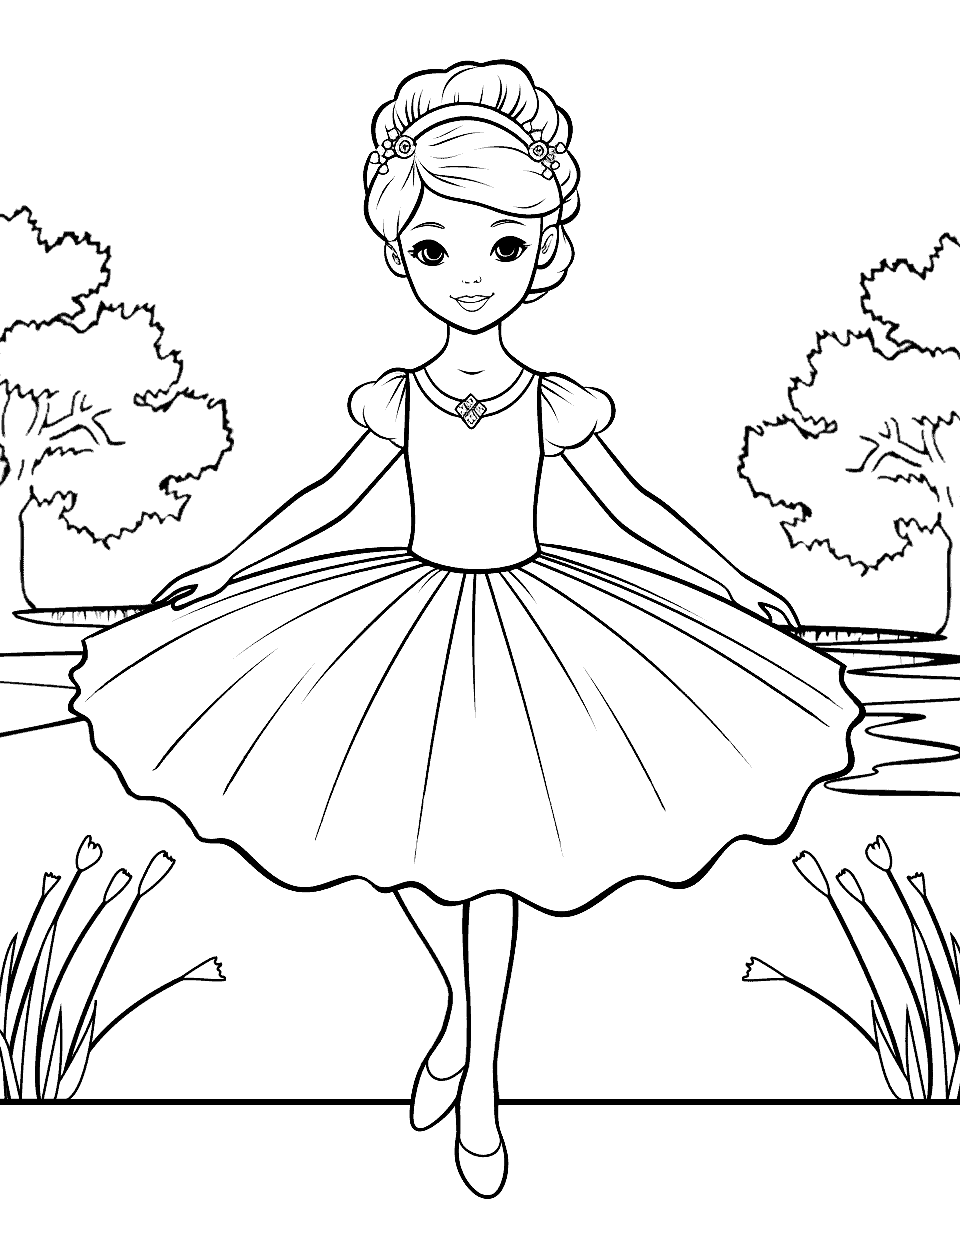 Ballerina by the Pond Coloring Page - A ballerina beside a serene pond.